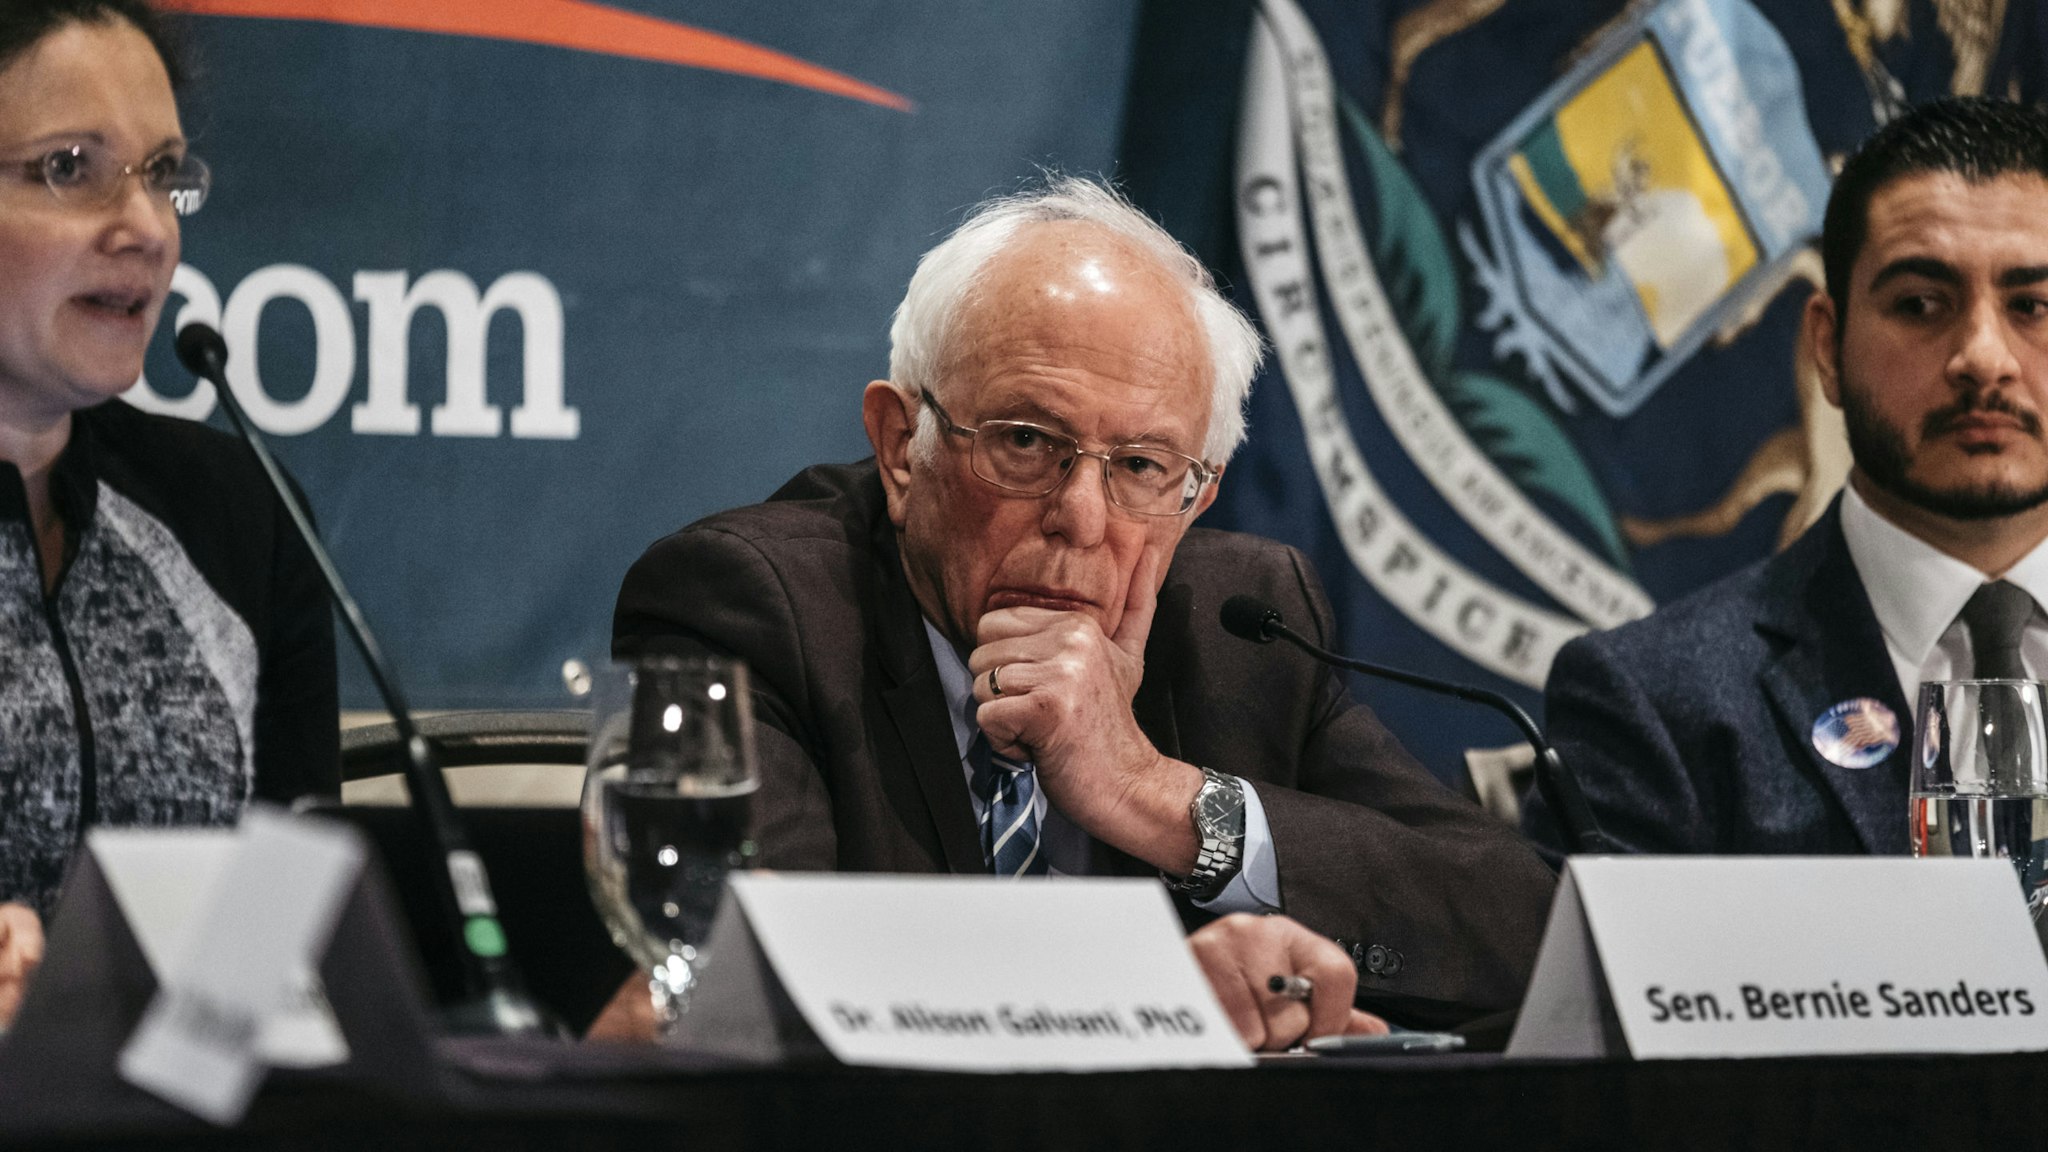 Senator Bernie Sanders, an Independent from Vermont and 2020 presidential candidate, listens during a coronavirus public health roundtable in Romulus, Michigan, U.S., on Monday, March 9, 2020. Sanders said any eventual vaccine for the deadly novel coronavirus should be made available free of charge once developed and approved for use. Photographer: Erin Kirkland/Bloomberg via Getty Images